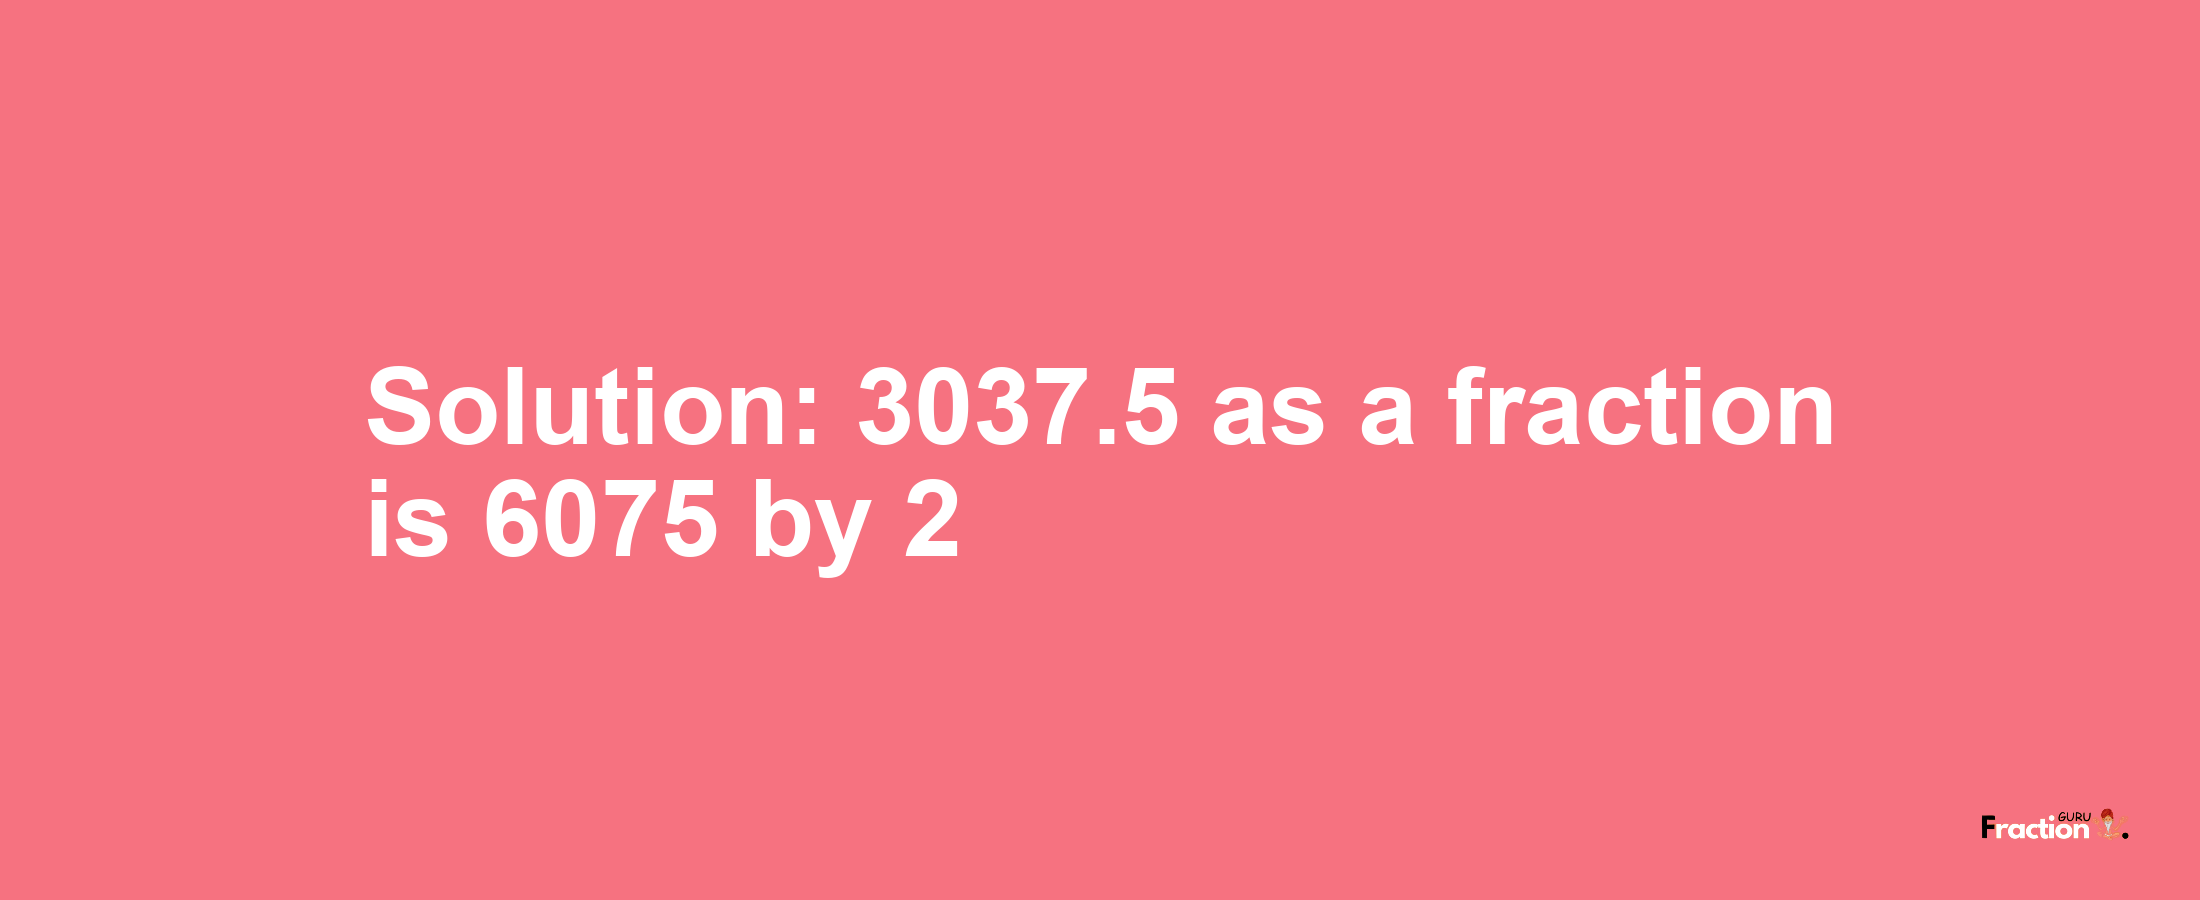 Solution:3037.5 as a fraction is 6075/2